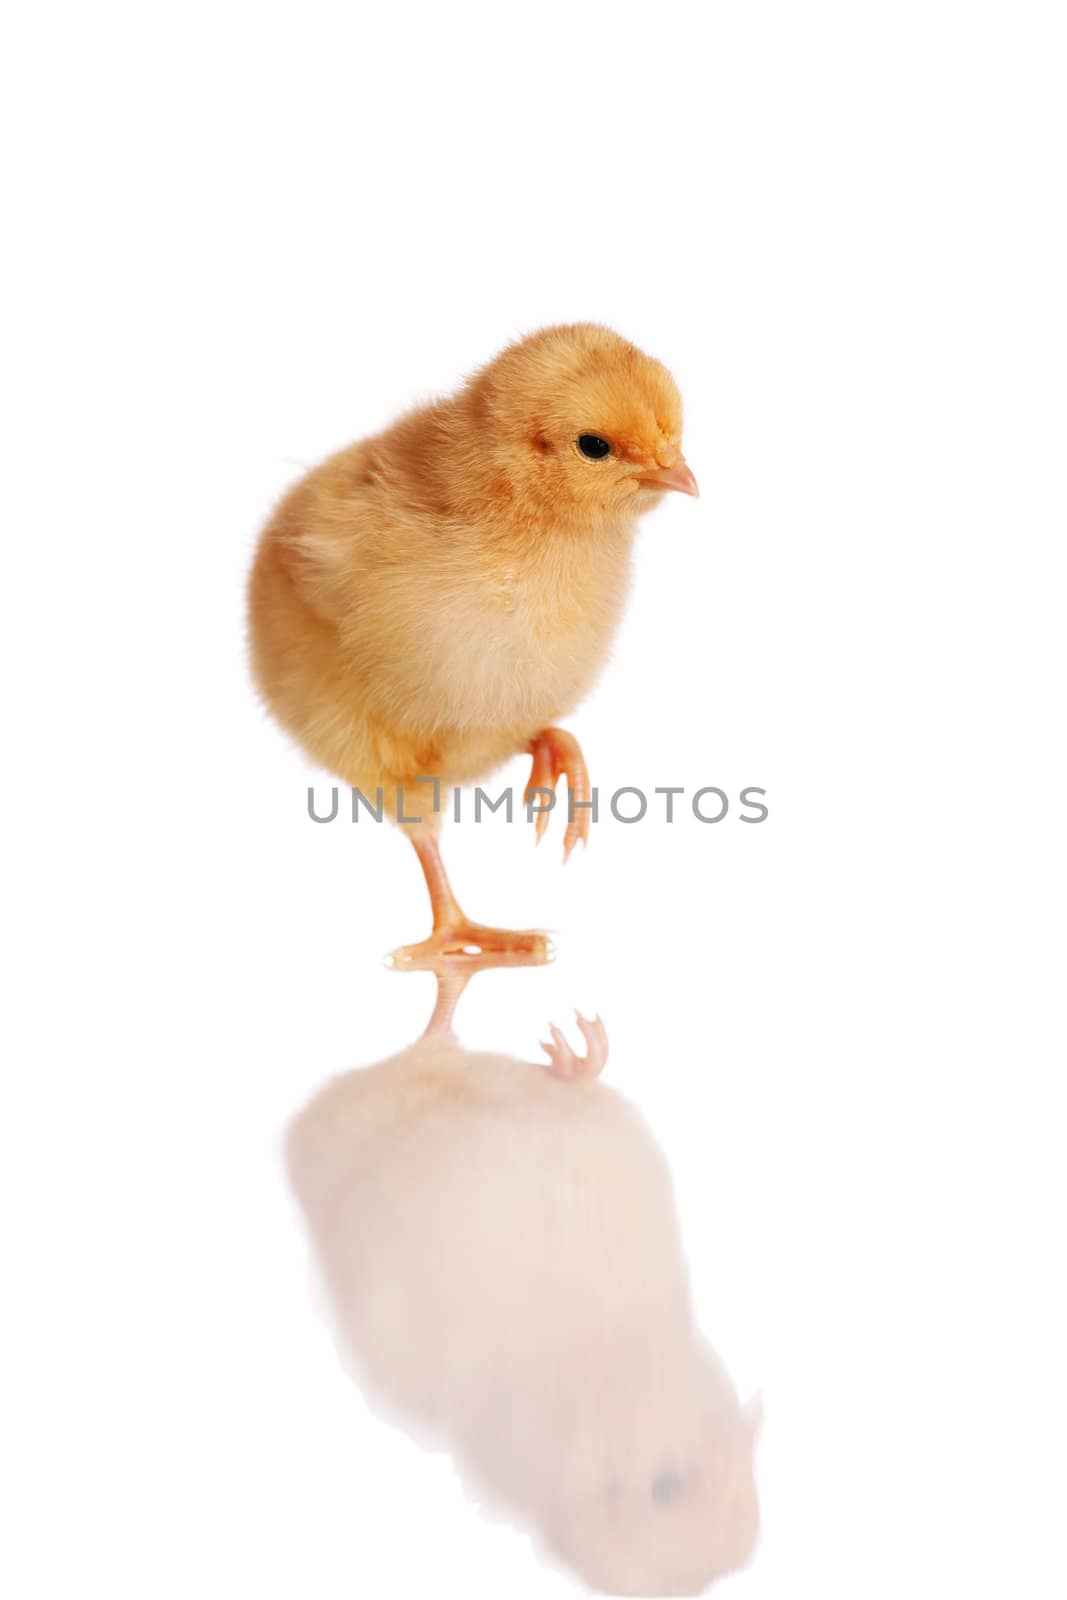 Cute chick standing or walking, isolated on white with reflection